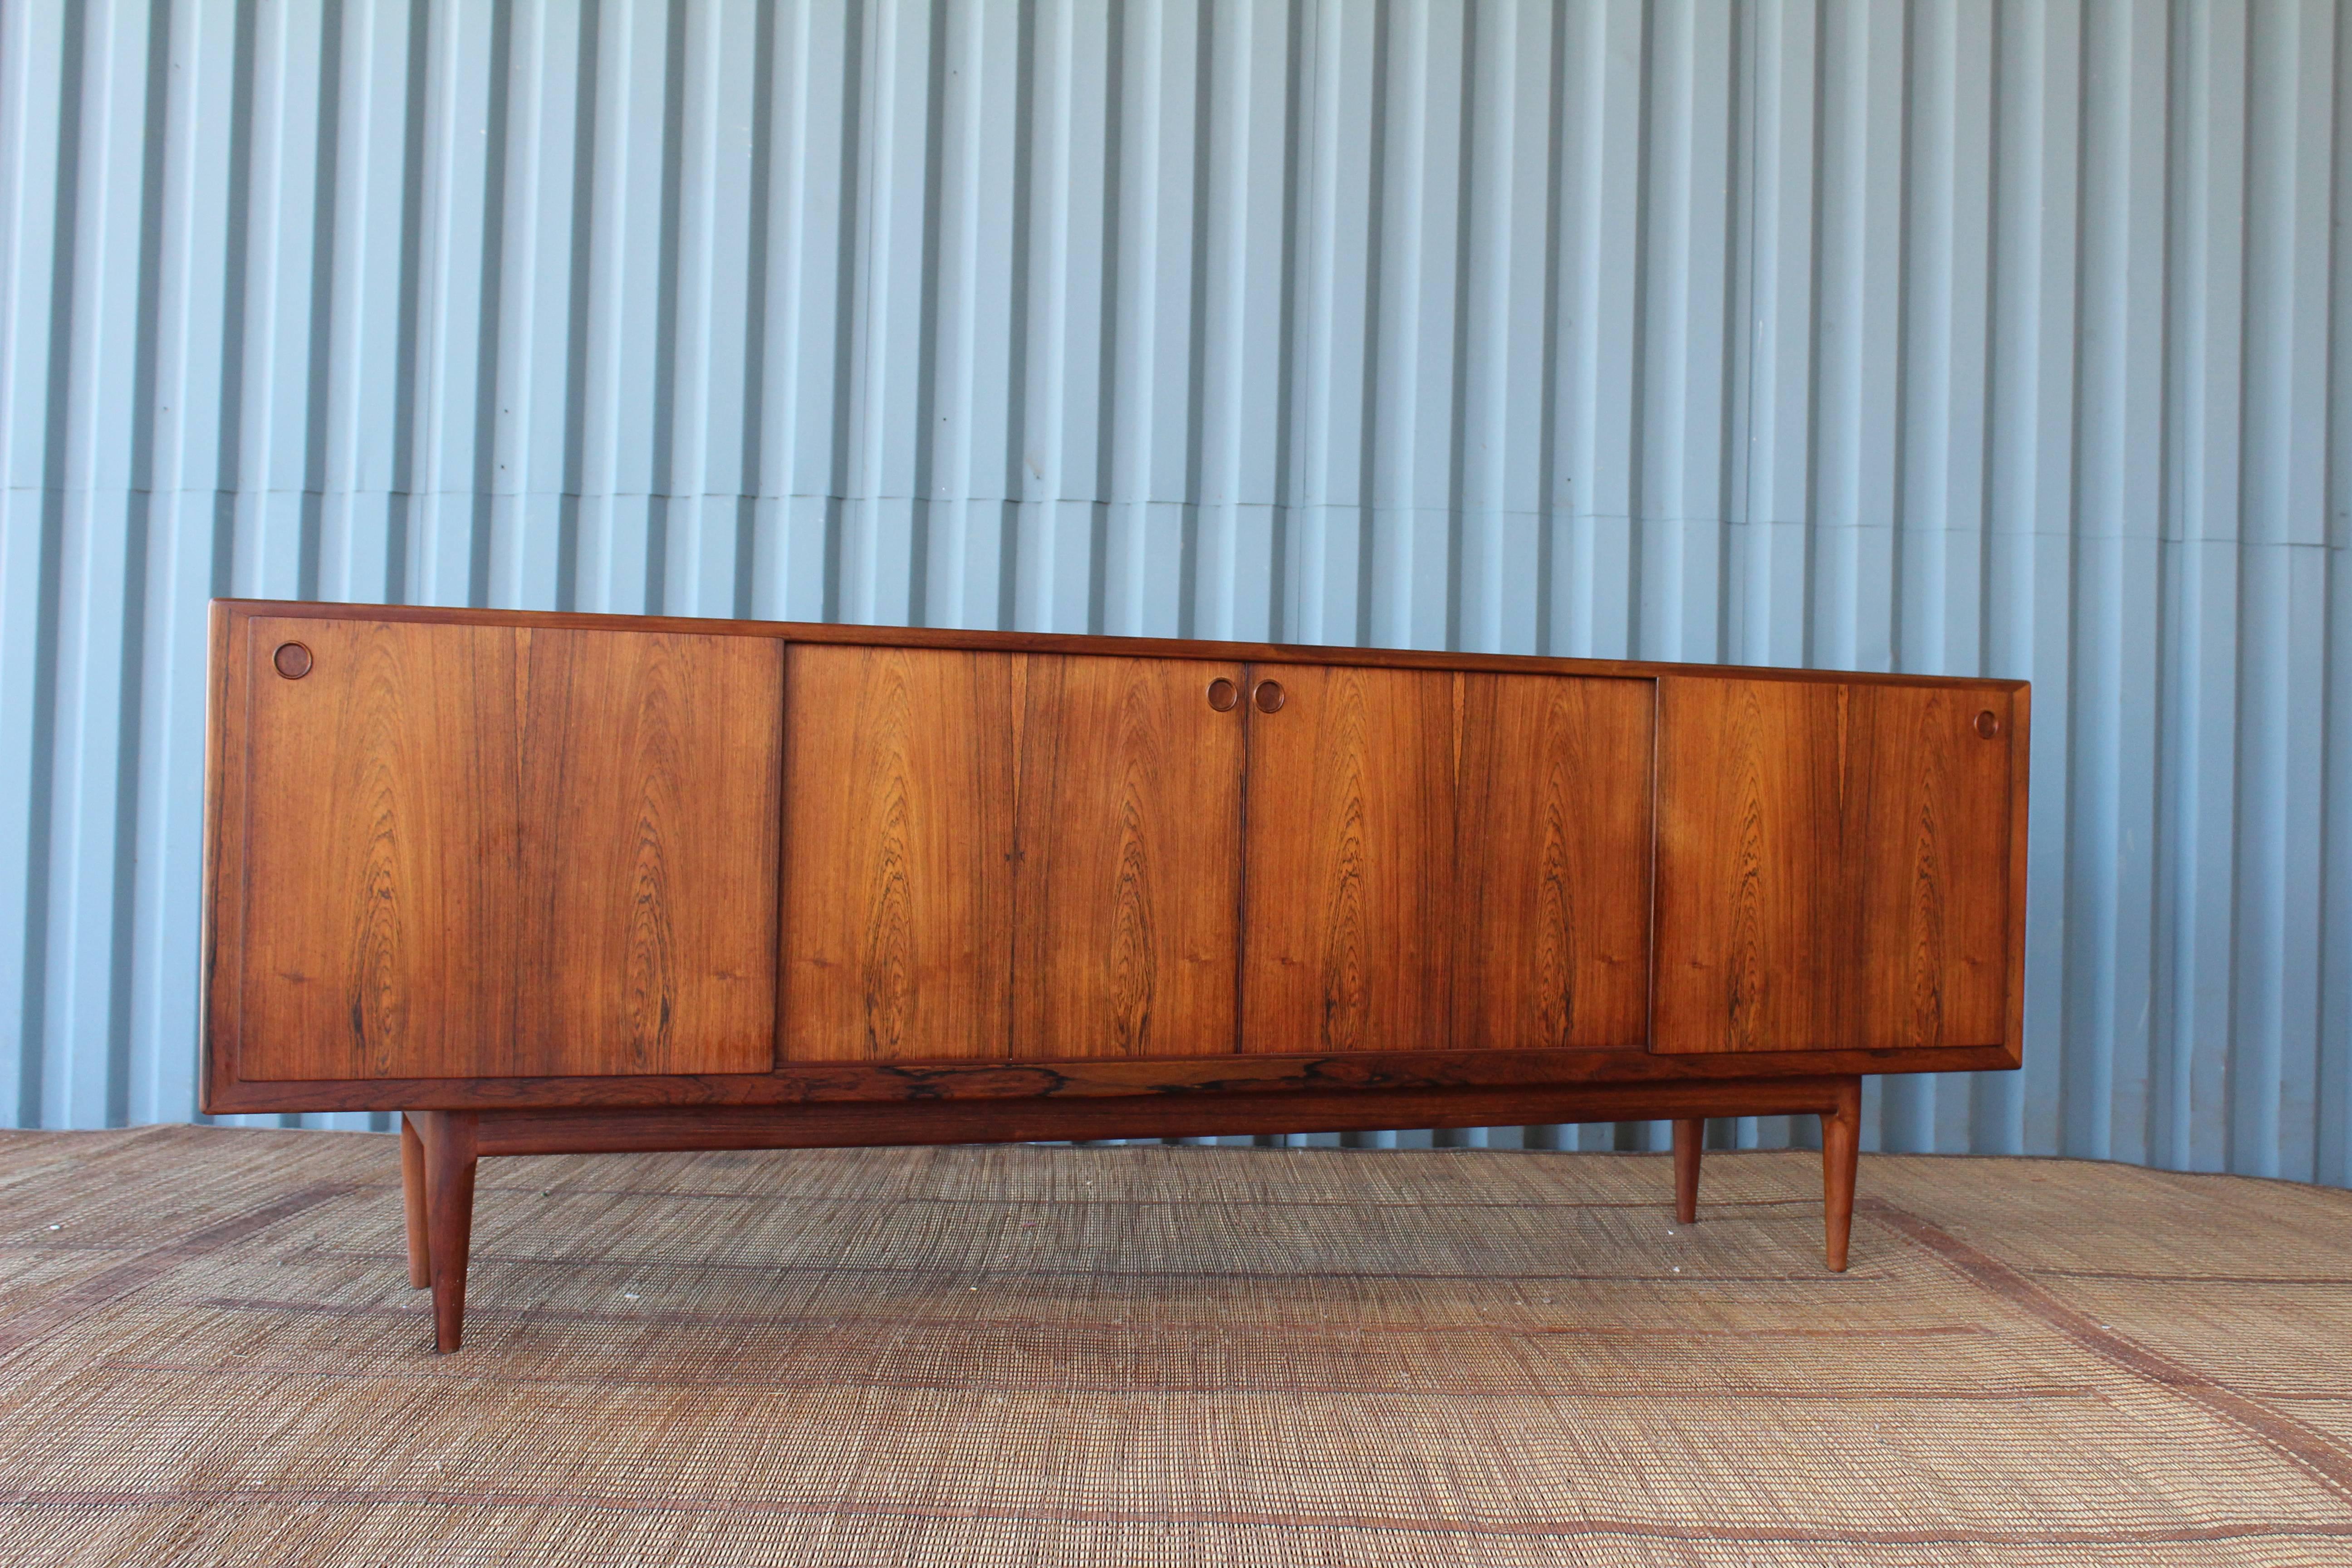 Substantial Danish credenza in beautiful Brazilian rosewood. Features four sliding doors and a gorgeous soaped oak interior. Behind the doors reveal plenty of storage with dovetail felt lined drawers and adjustable shelving. A truly remarkable piece